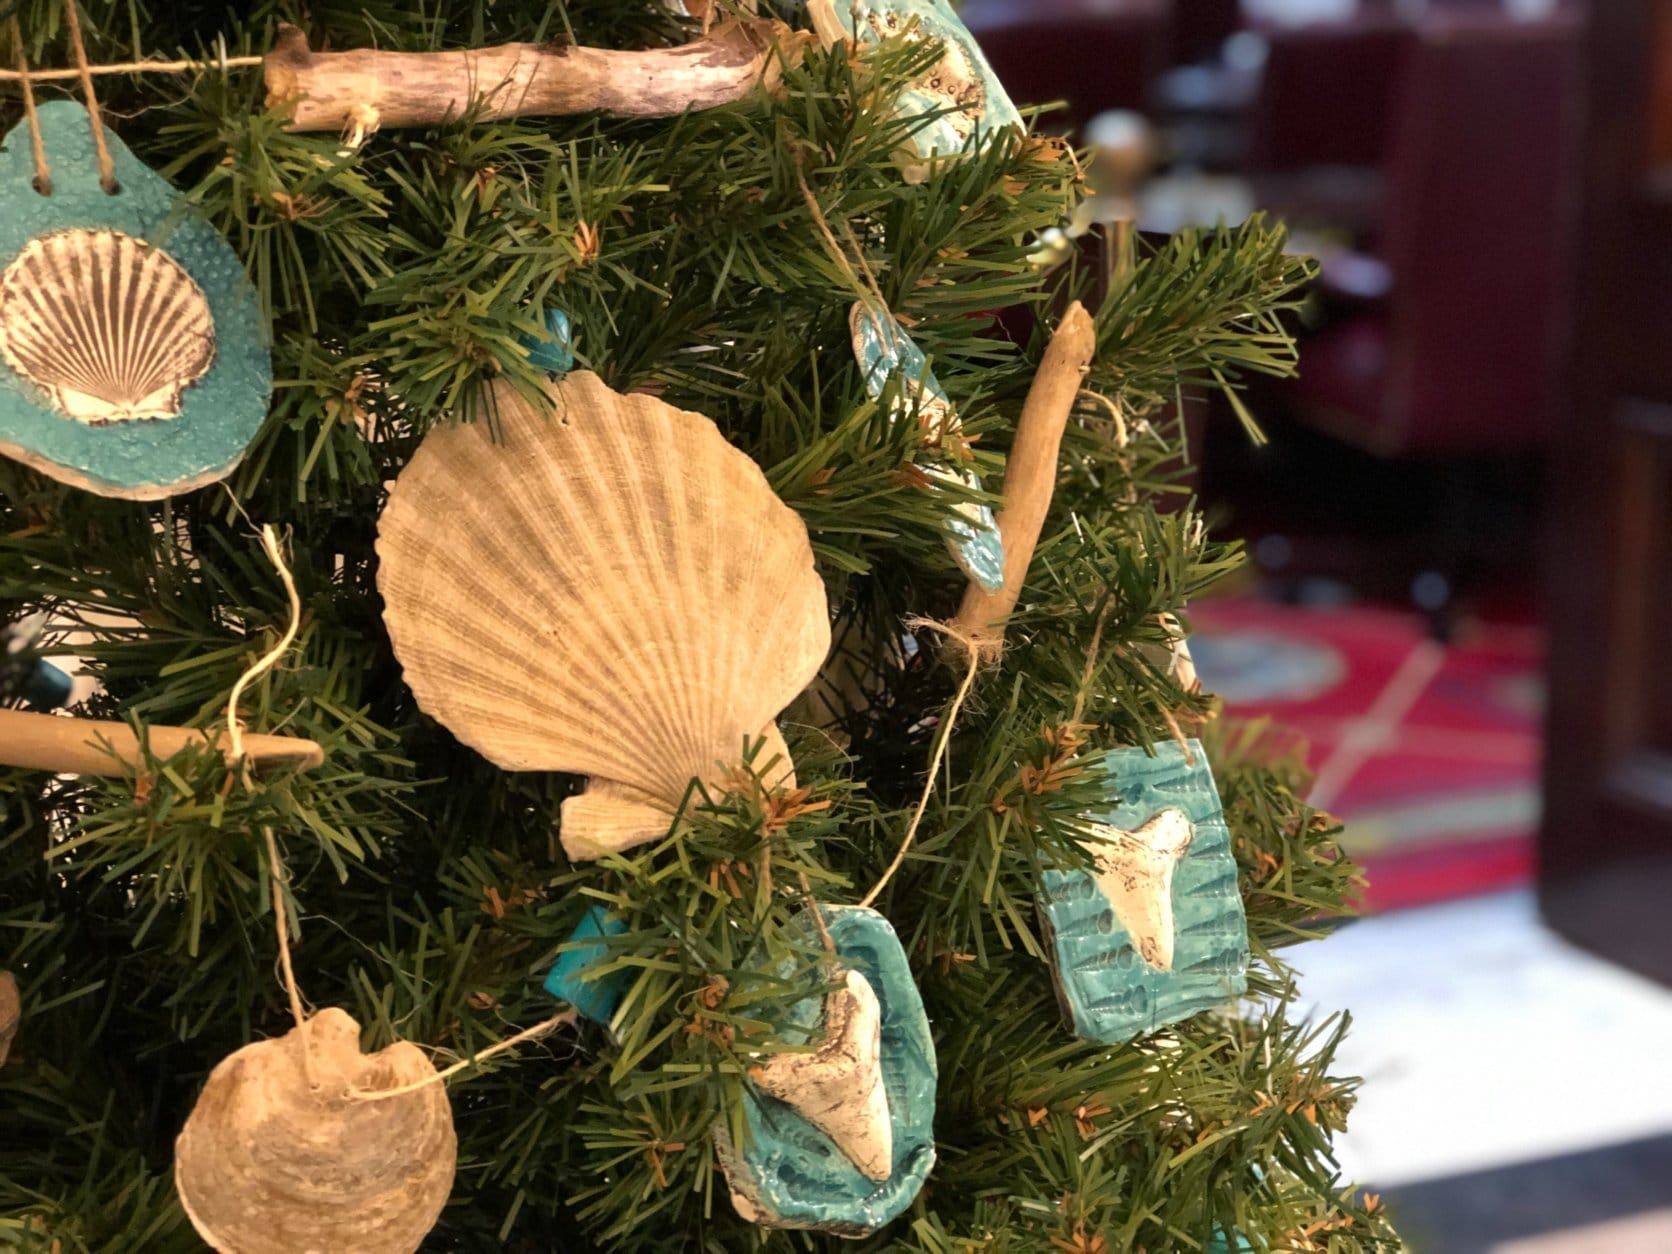 Guess which county tree features fossils and shells? It could only be the home of Calvert Cliffs—the Calvert County tree. (WTOP/Kate Ryan)